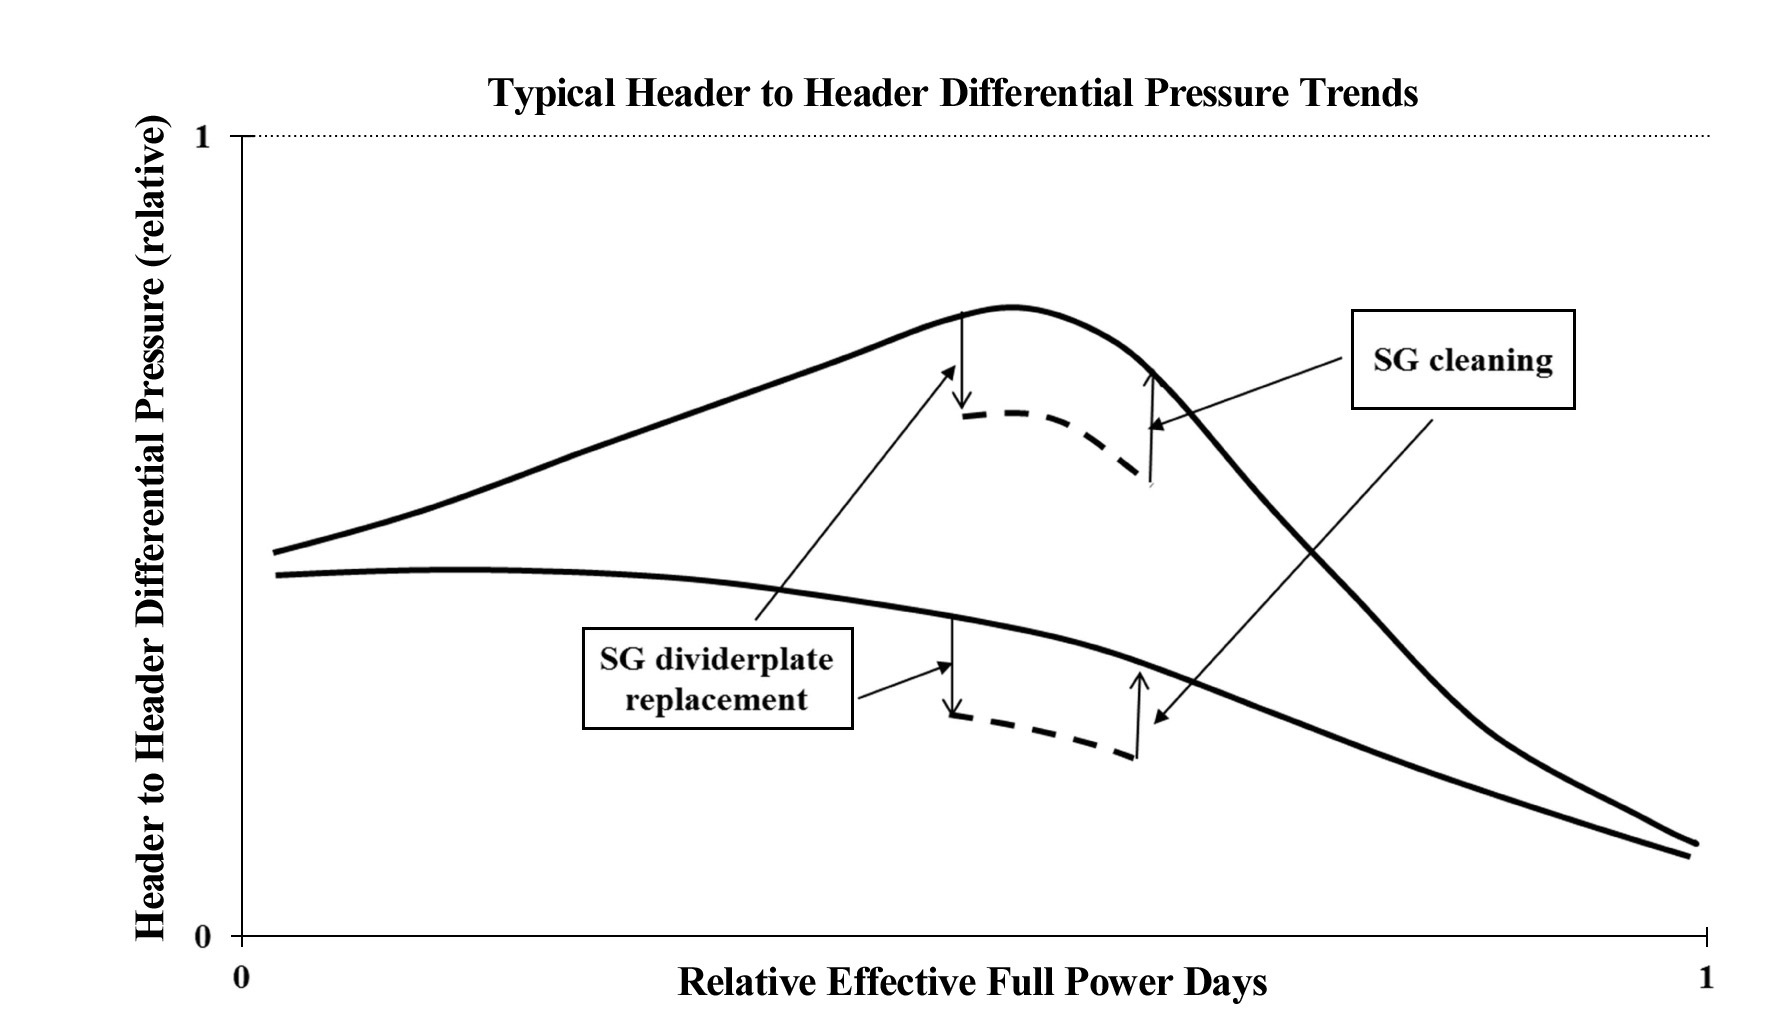 Typical Header-to-Header Differential Pressure Trends of a CANDU Plant